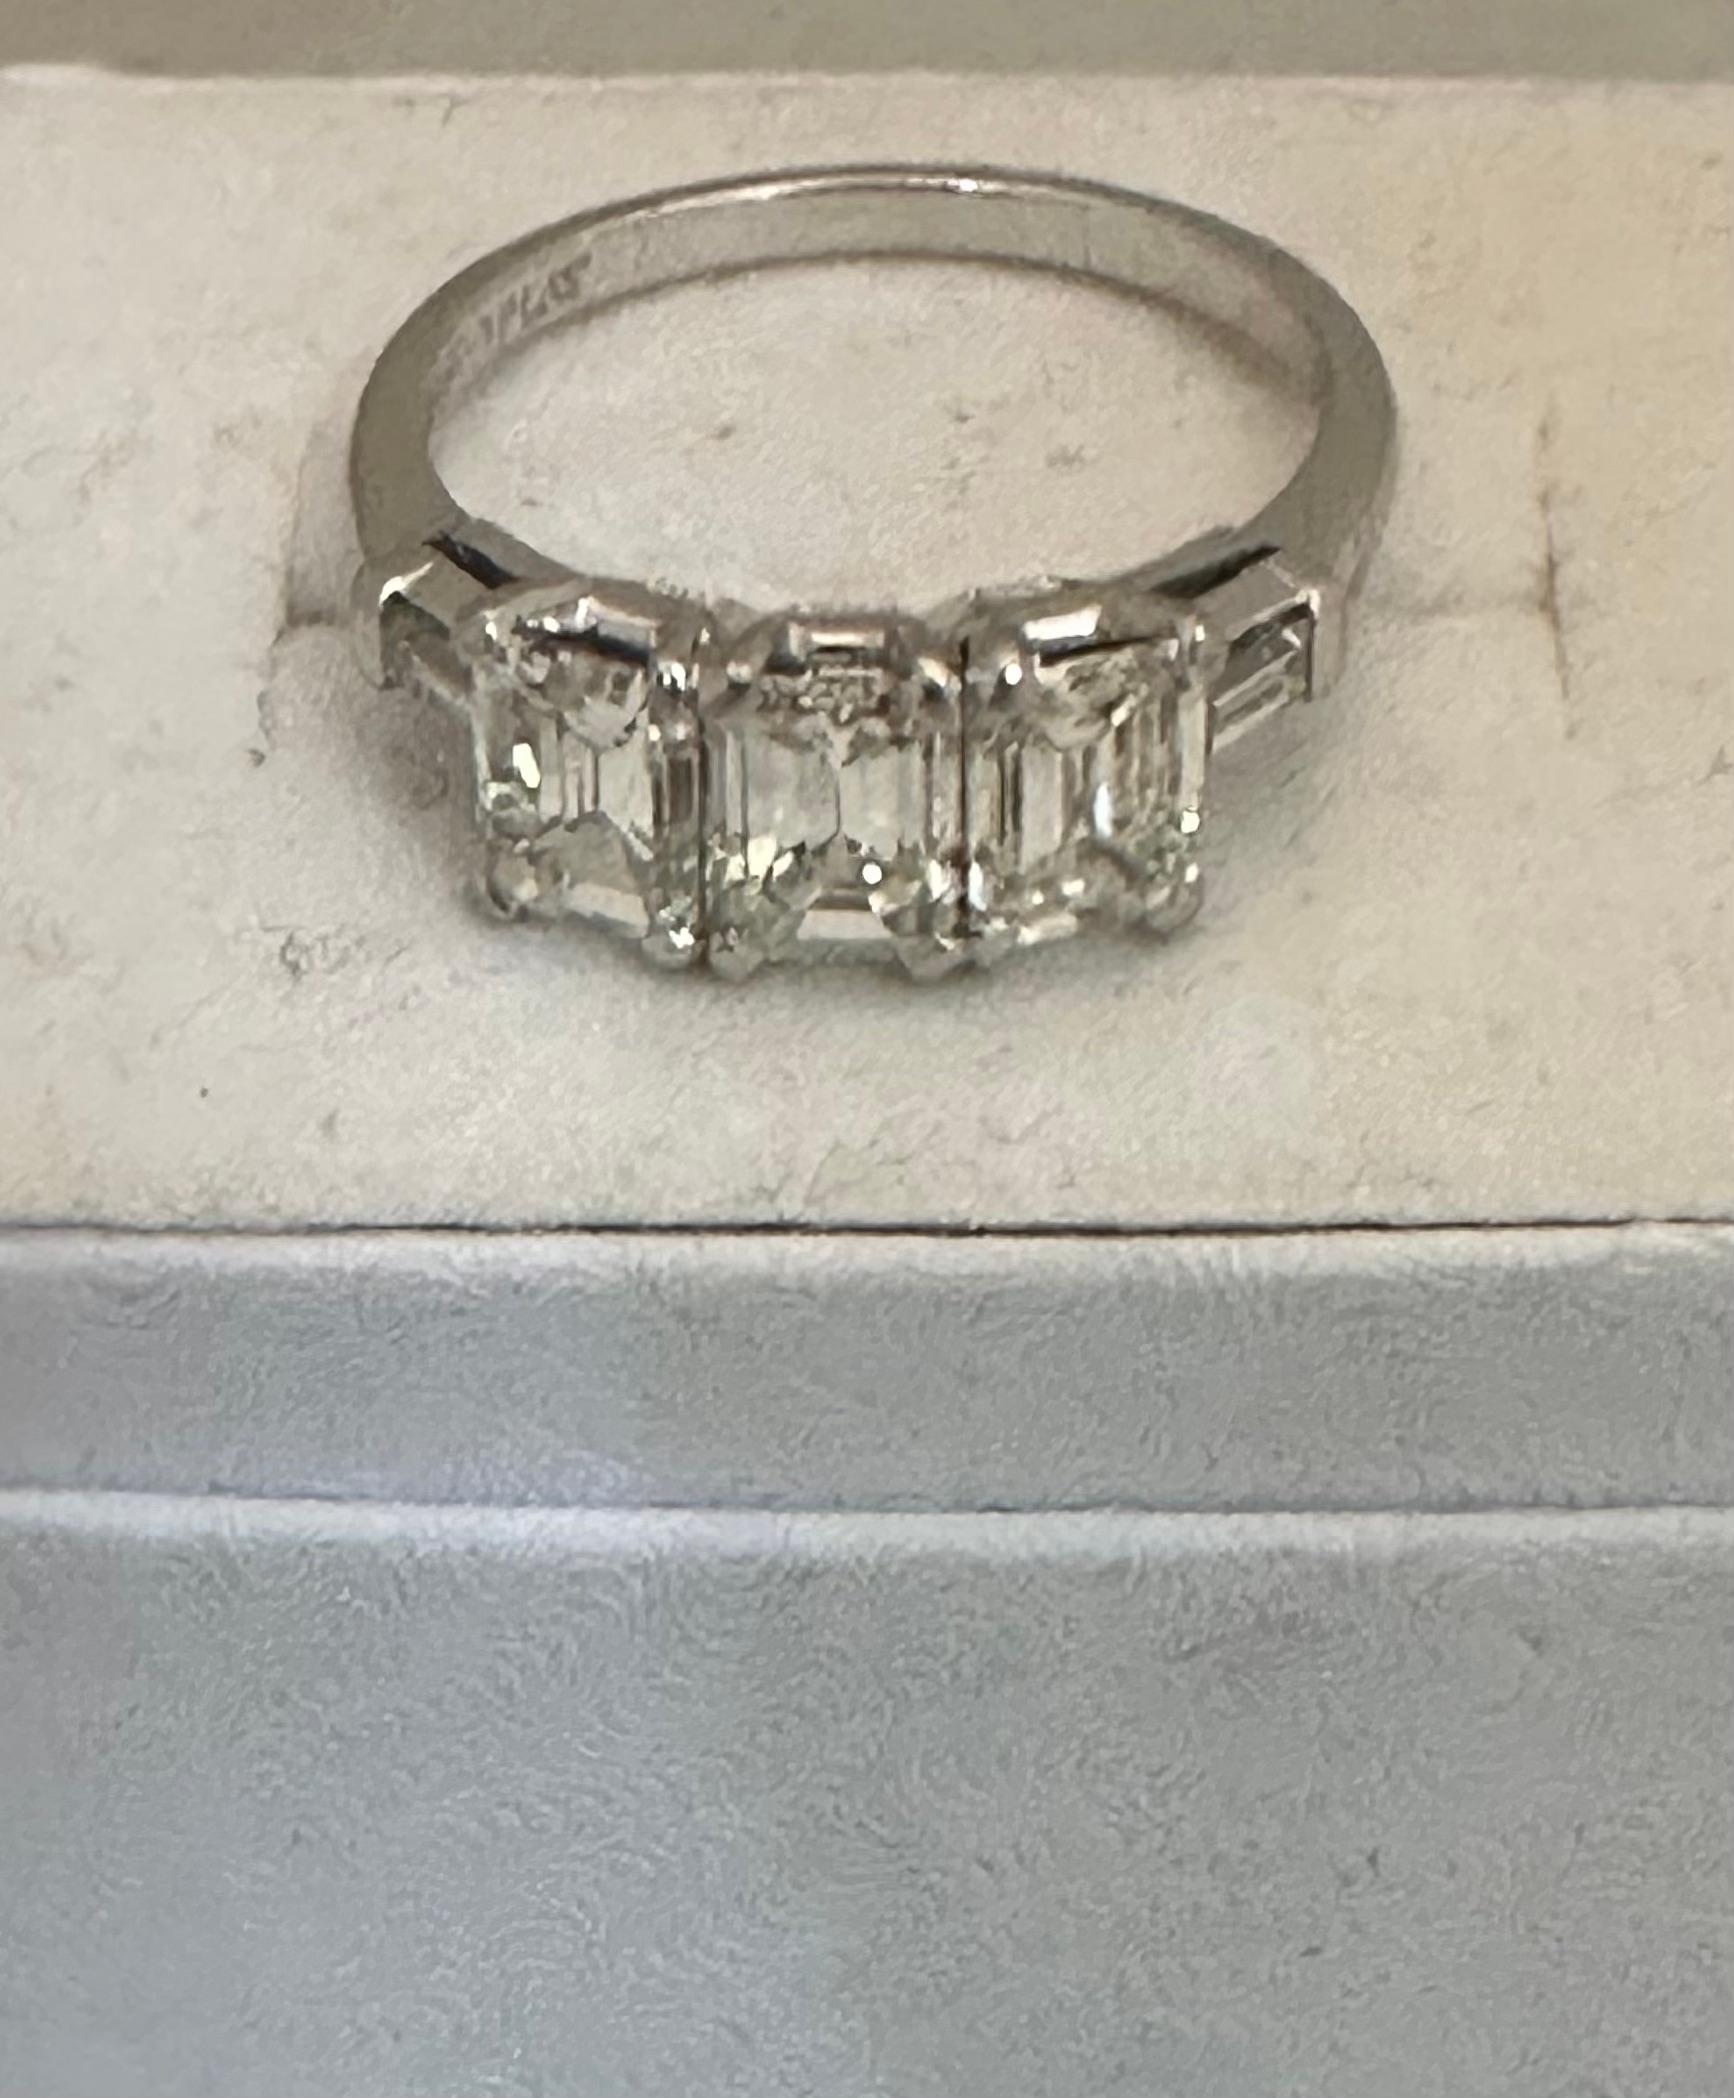 This vintage 1960s ladies platinum/ diamond ring is designed with three emerald cut diamonds & two baguettes. The total of the three center diamonds is 1.80 carats & the two baguettes weigh a total of 0.12 carats. The band is stamped platinum. The